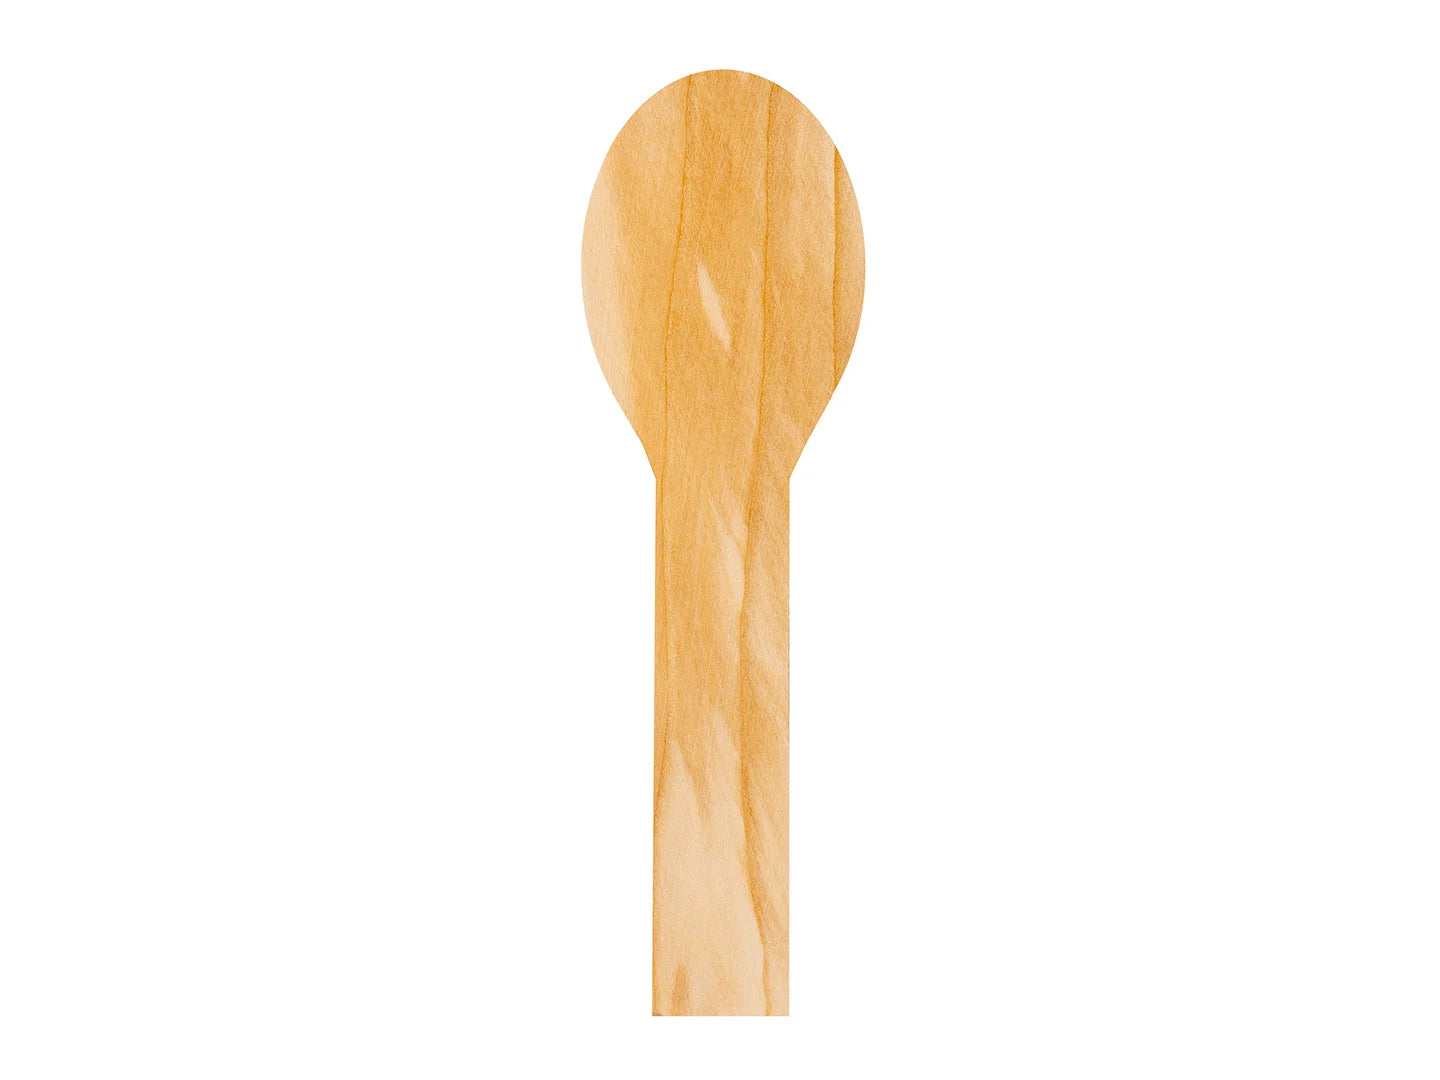 Apricot Wooden Blank